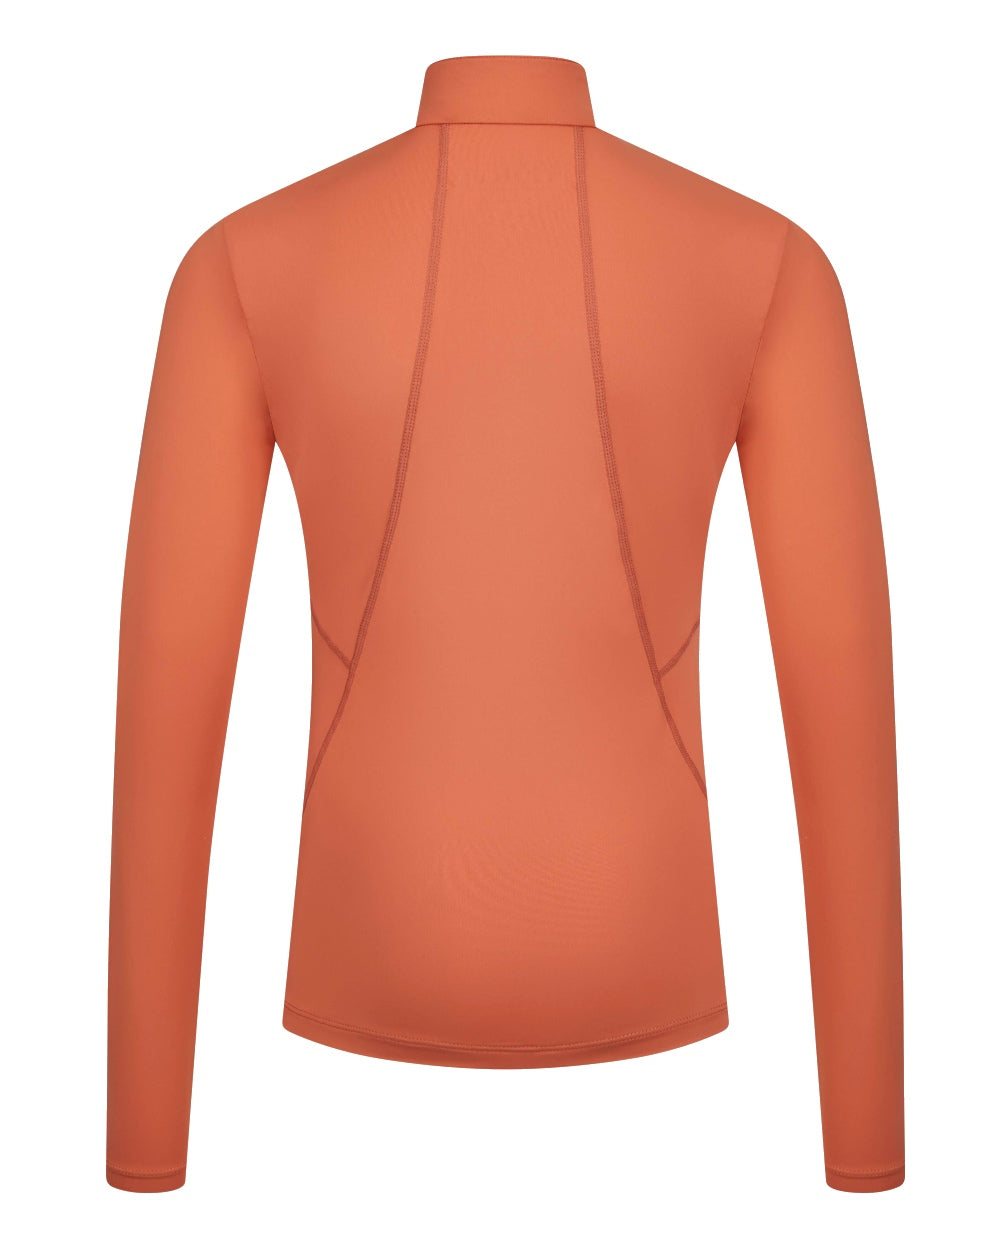 Apricot coloured LeMieux Young Rider Base Layer on white background 